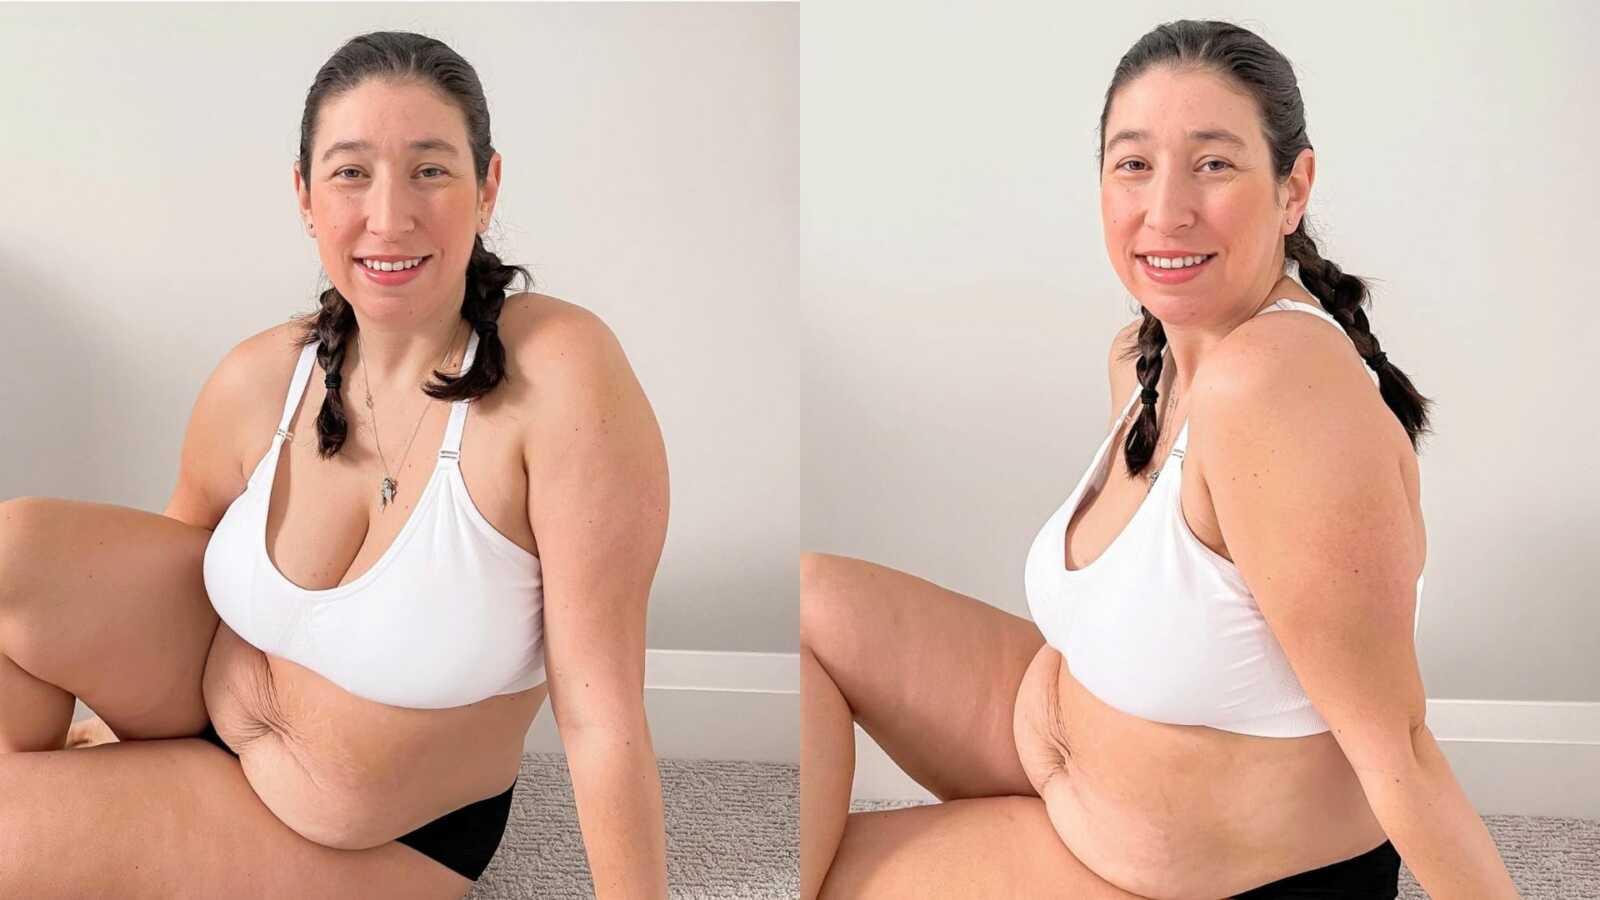 Mom confidently takes pictures in bra and underwear, embracing her postpartum body